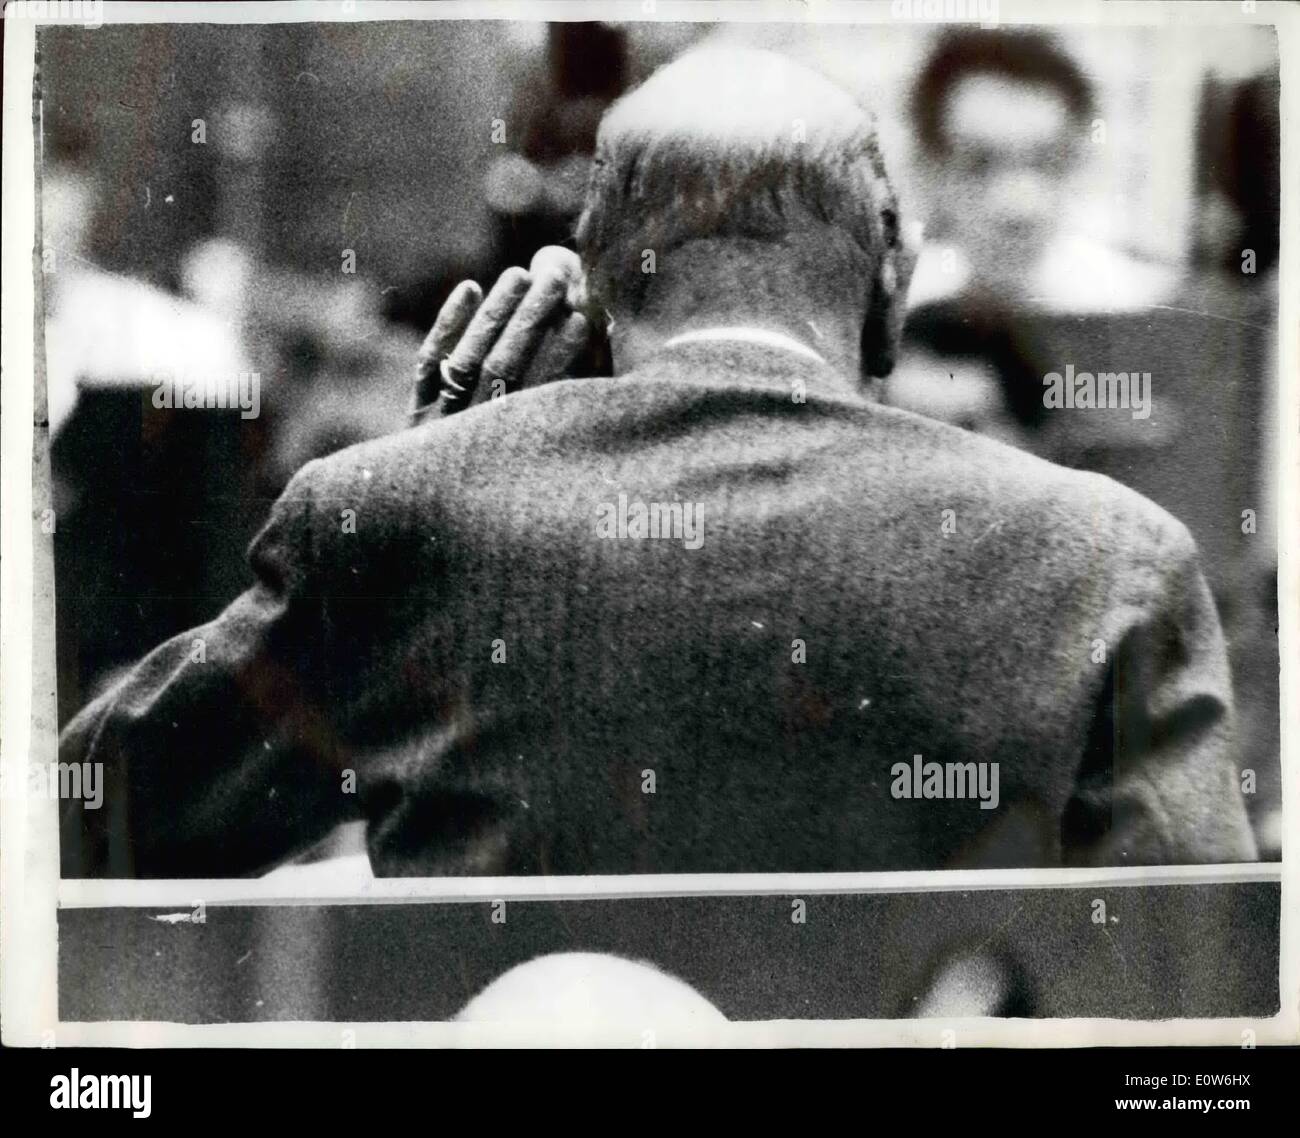 Oct. 10, 1961 - THE MAN WITH AN EAR FOR MUSIC. THE MASTER LISTENS CRITICALLY: The world's greatest living composer, Igor Stravinsky, the man who in 50 years has heard his music dismissed and condemned, accepted and acclaimed, was yesterday seen listening critically to a rehearsal by the B.B.C. Symphony Orchestra. The Festival Hall will be packed with celebrities for the 79-year-old composer's concert on Sunday. Photo Shows: Hand cupped to his ear and sharply alert Igor Stravinsky listens critically during the rehearsal by the B.B.C. Symphony Orchestra. Stock Photo